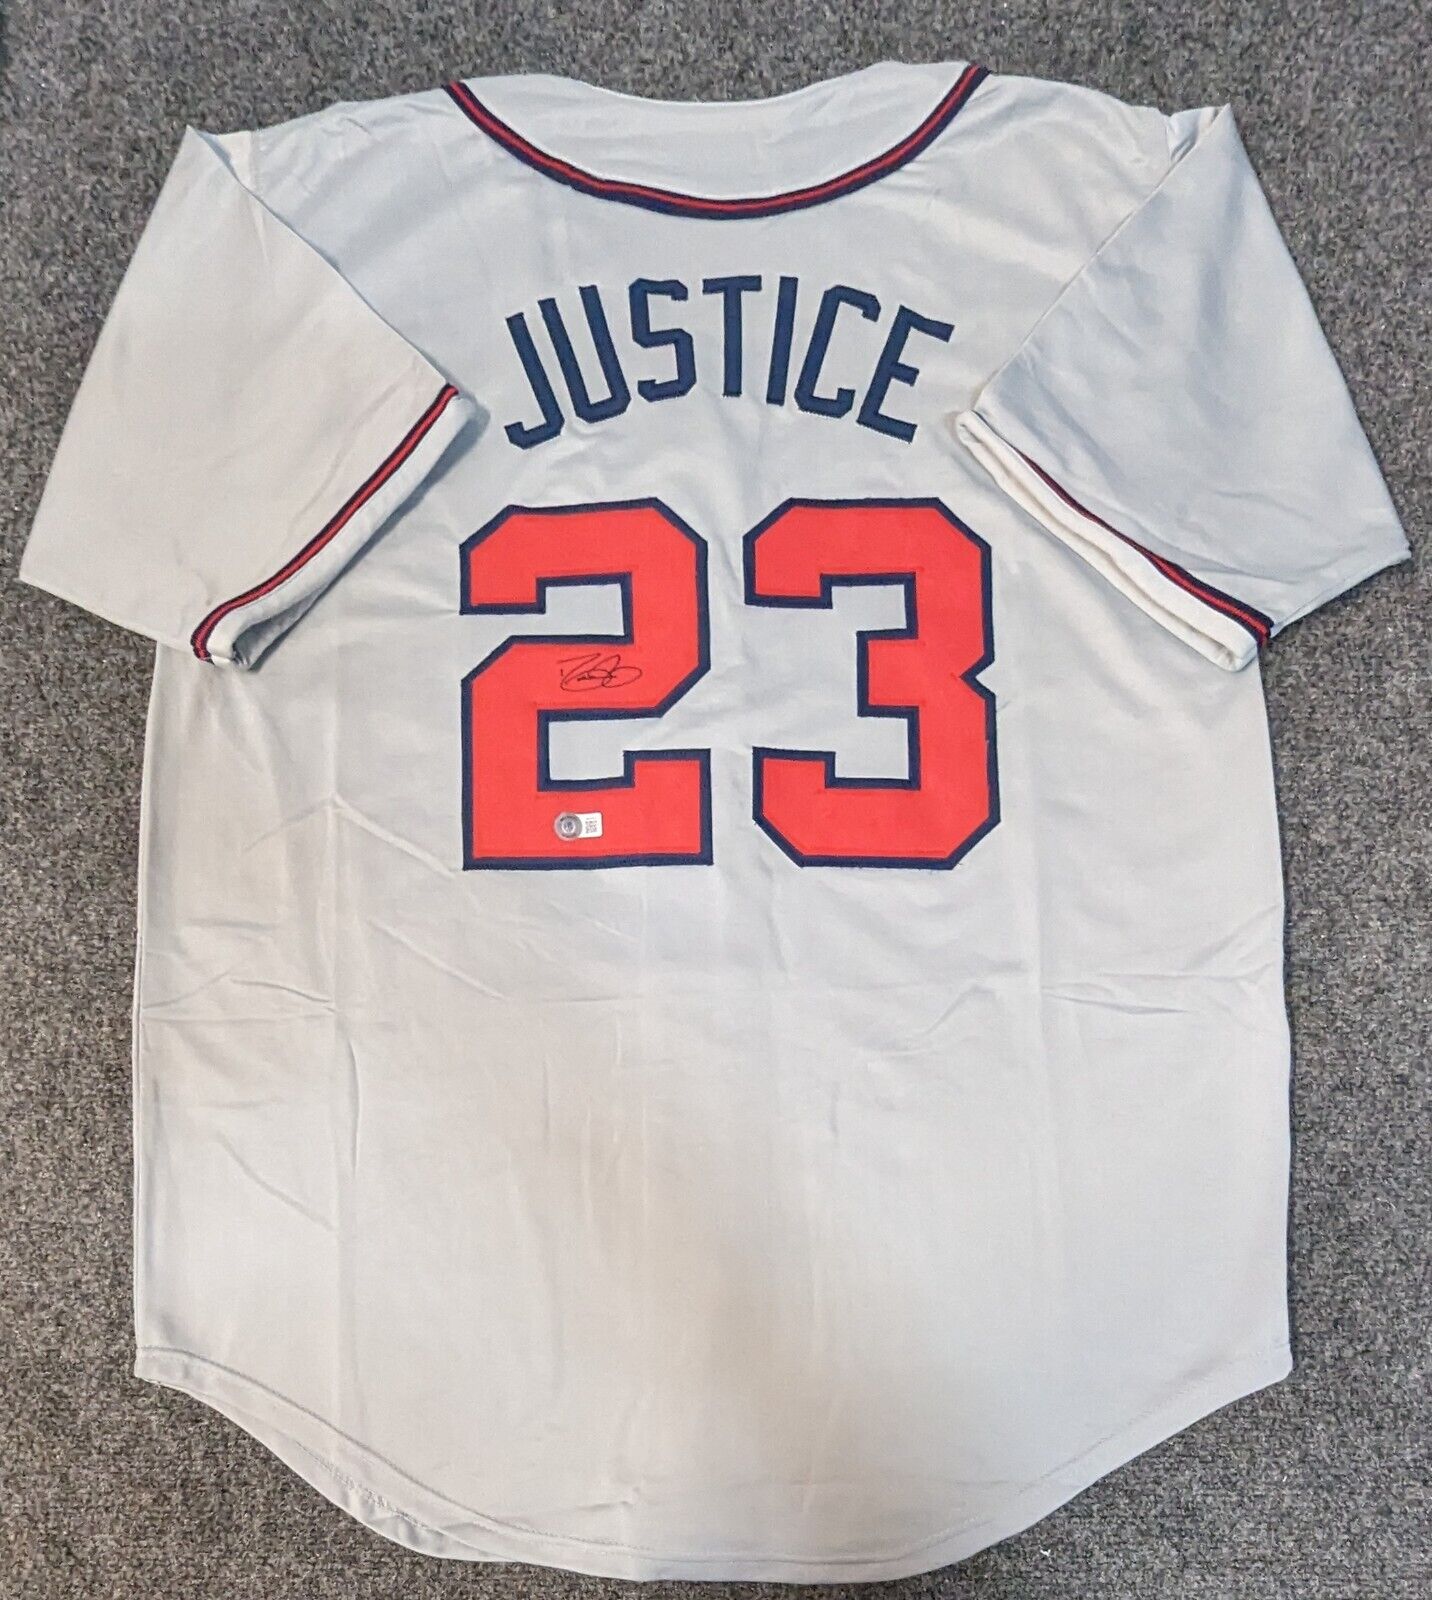 braves autographed jersey